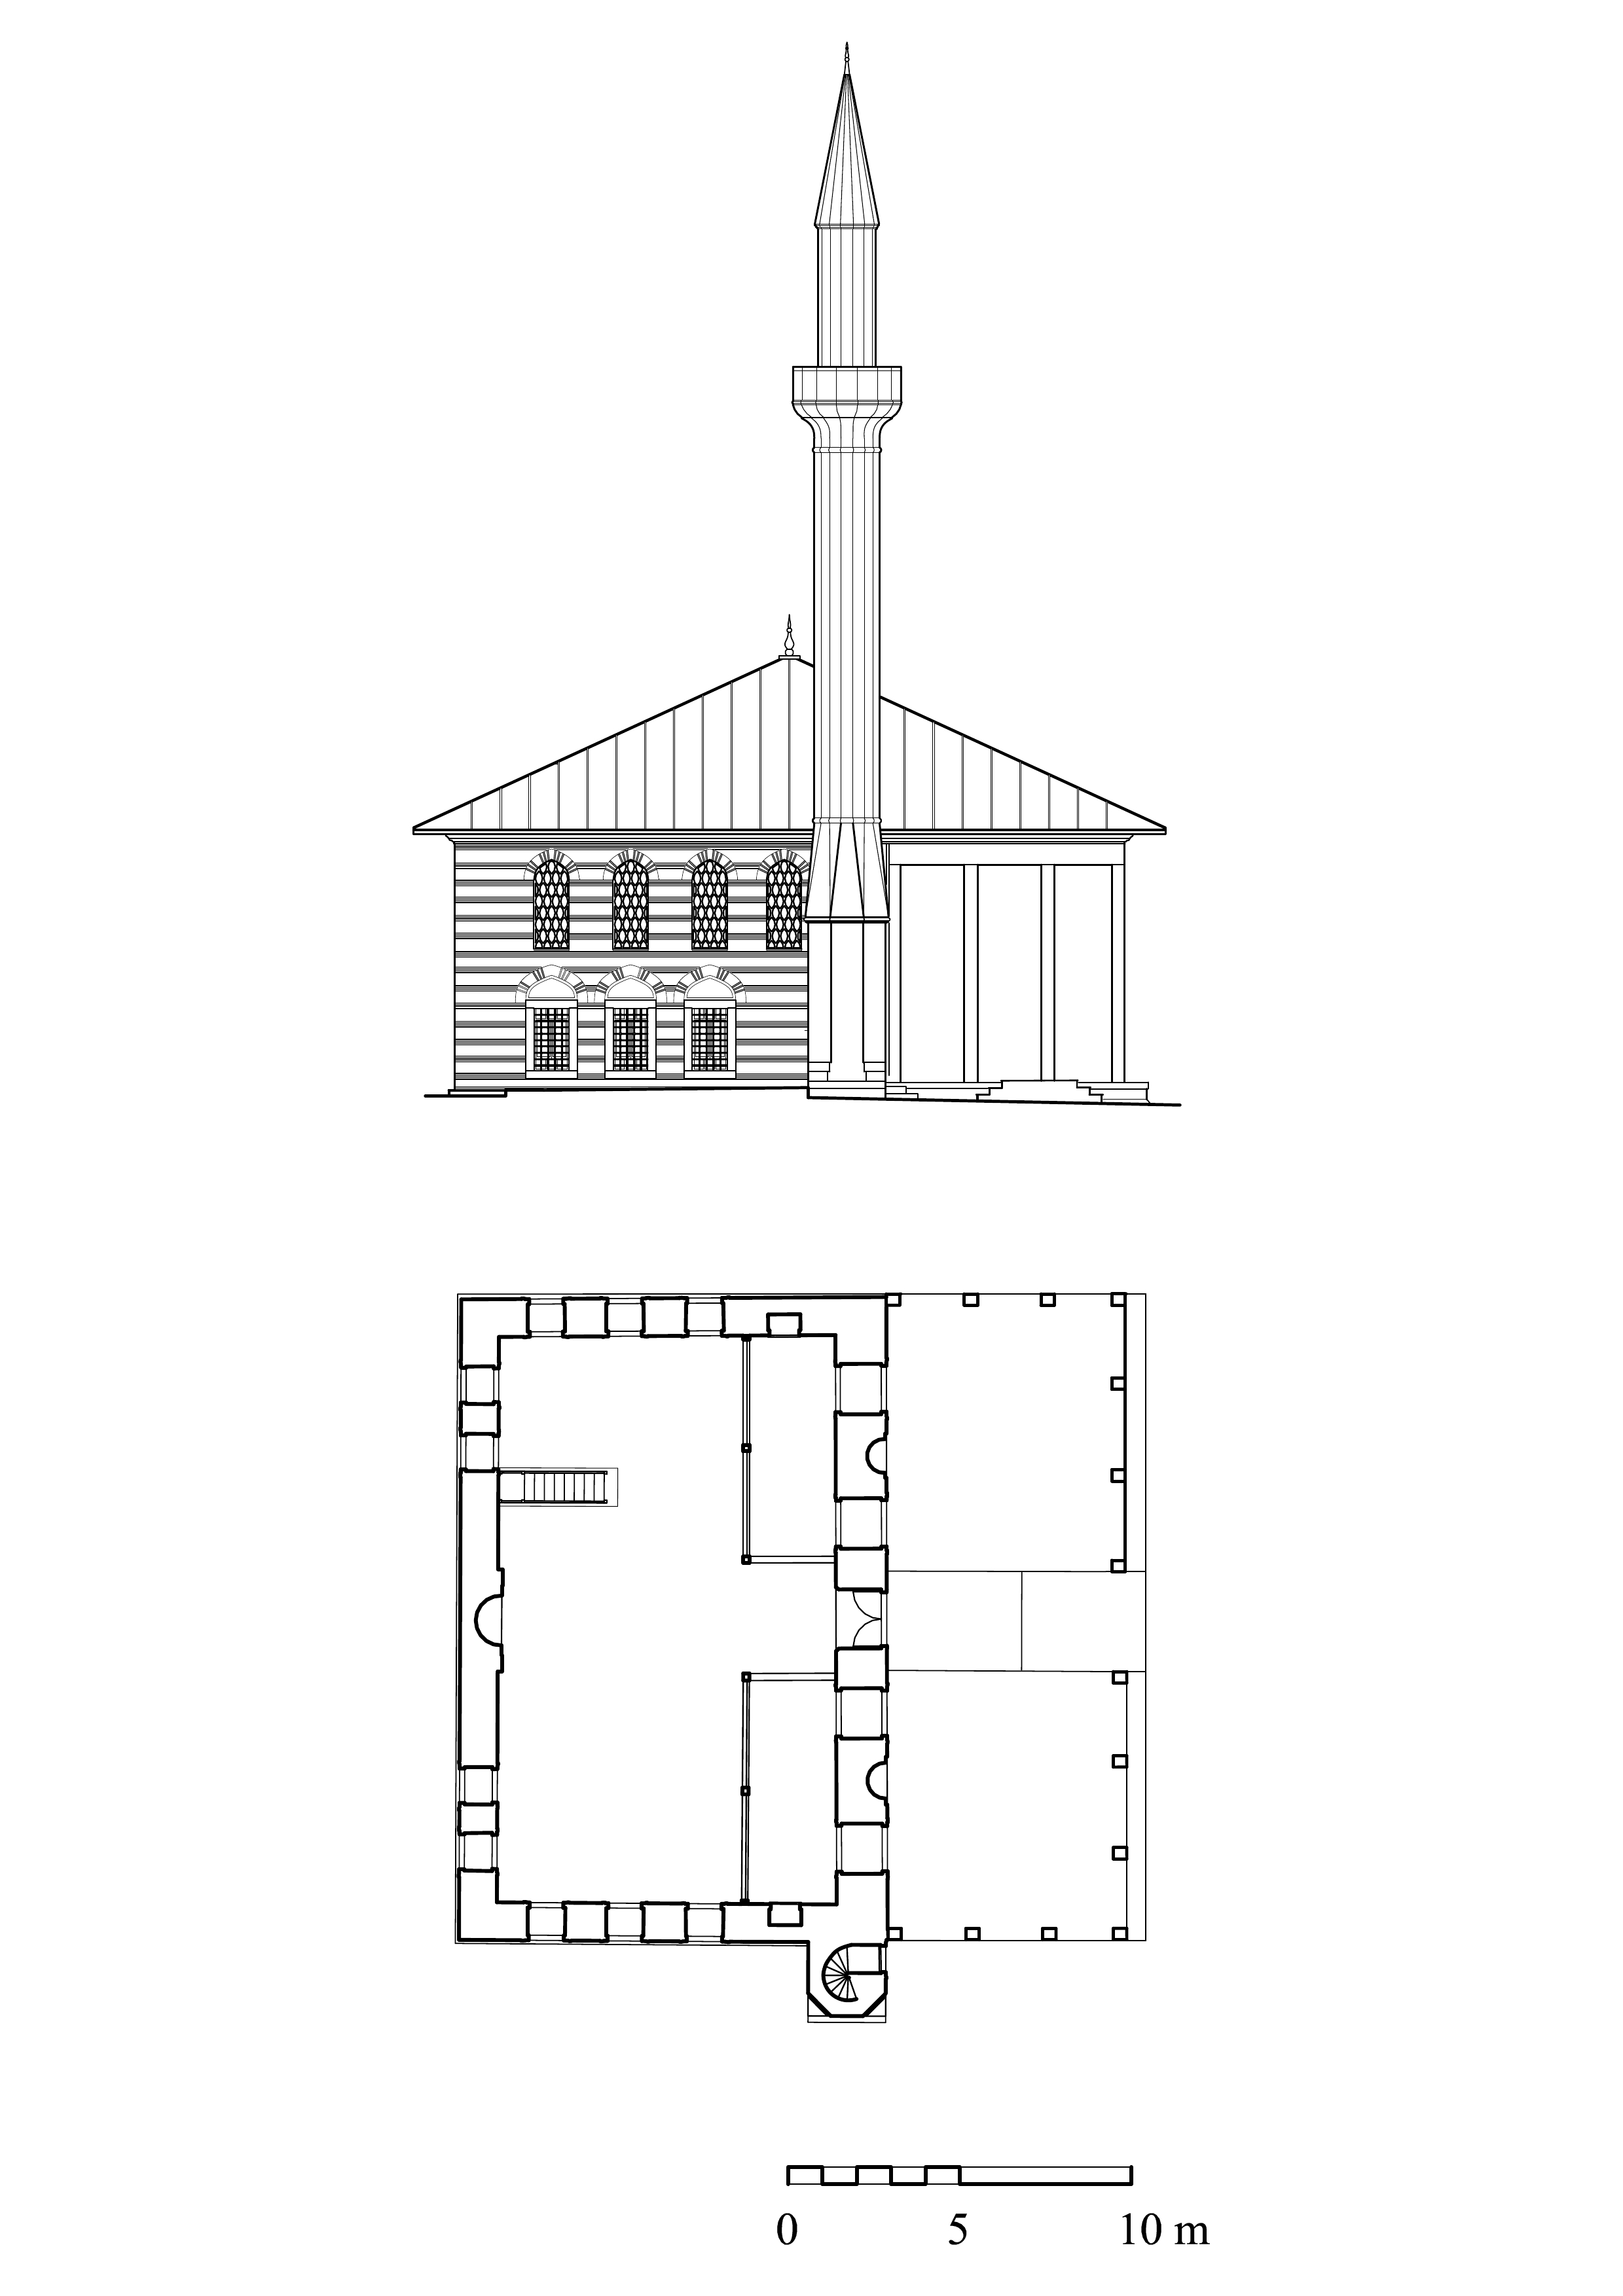 Floor plan and elevation with hypothetical reconstruction of portico